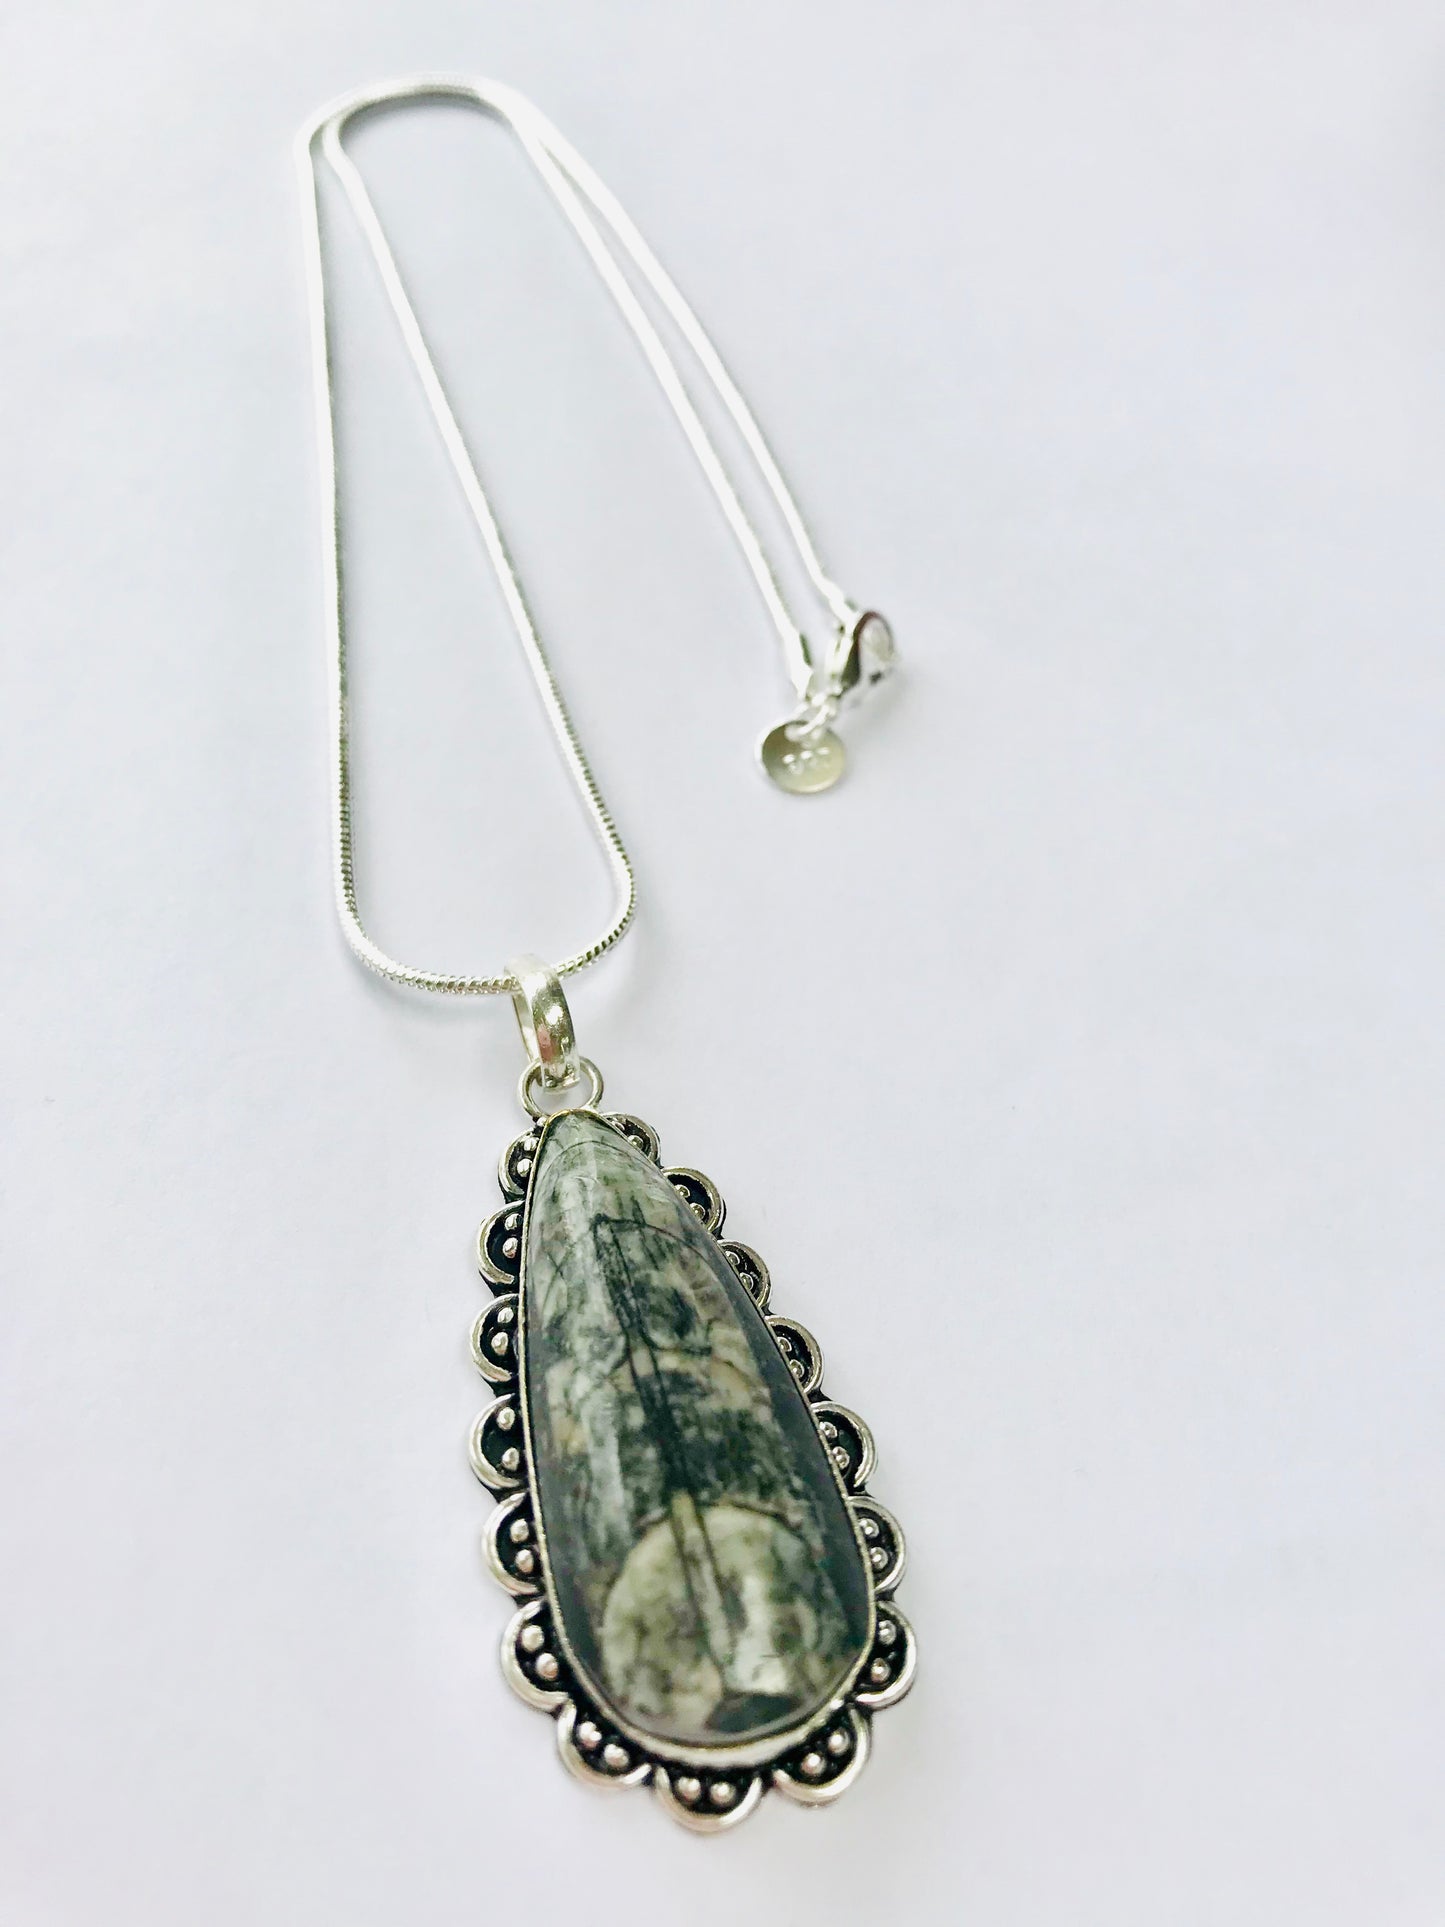 Orthoceras Fossil Pendant & 925 Silver Snake Chain - Reduces Toxins - Crystal Boutique.co.uk 